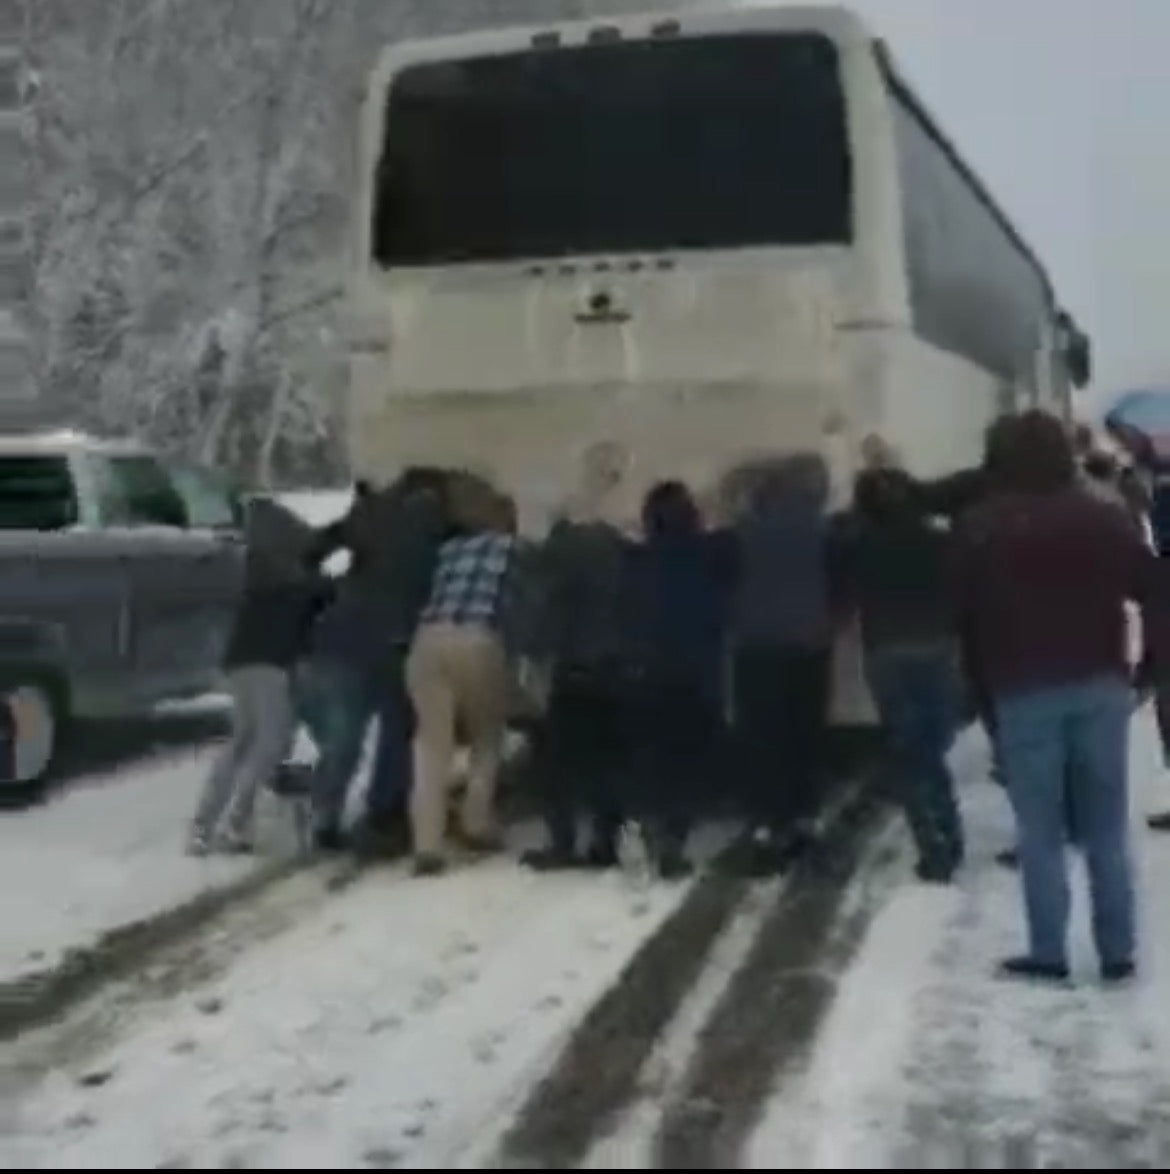 Group of people pushing large bus on a snow covered street.